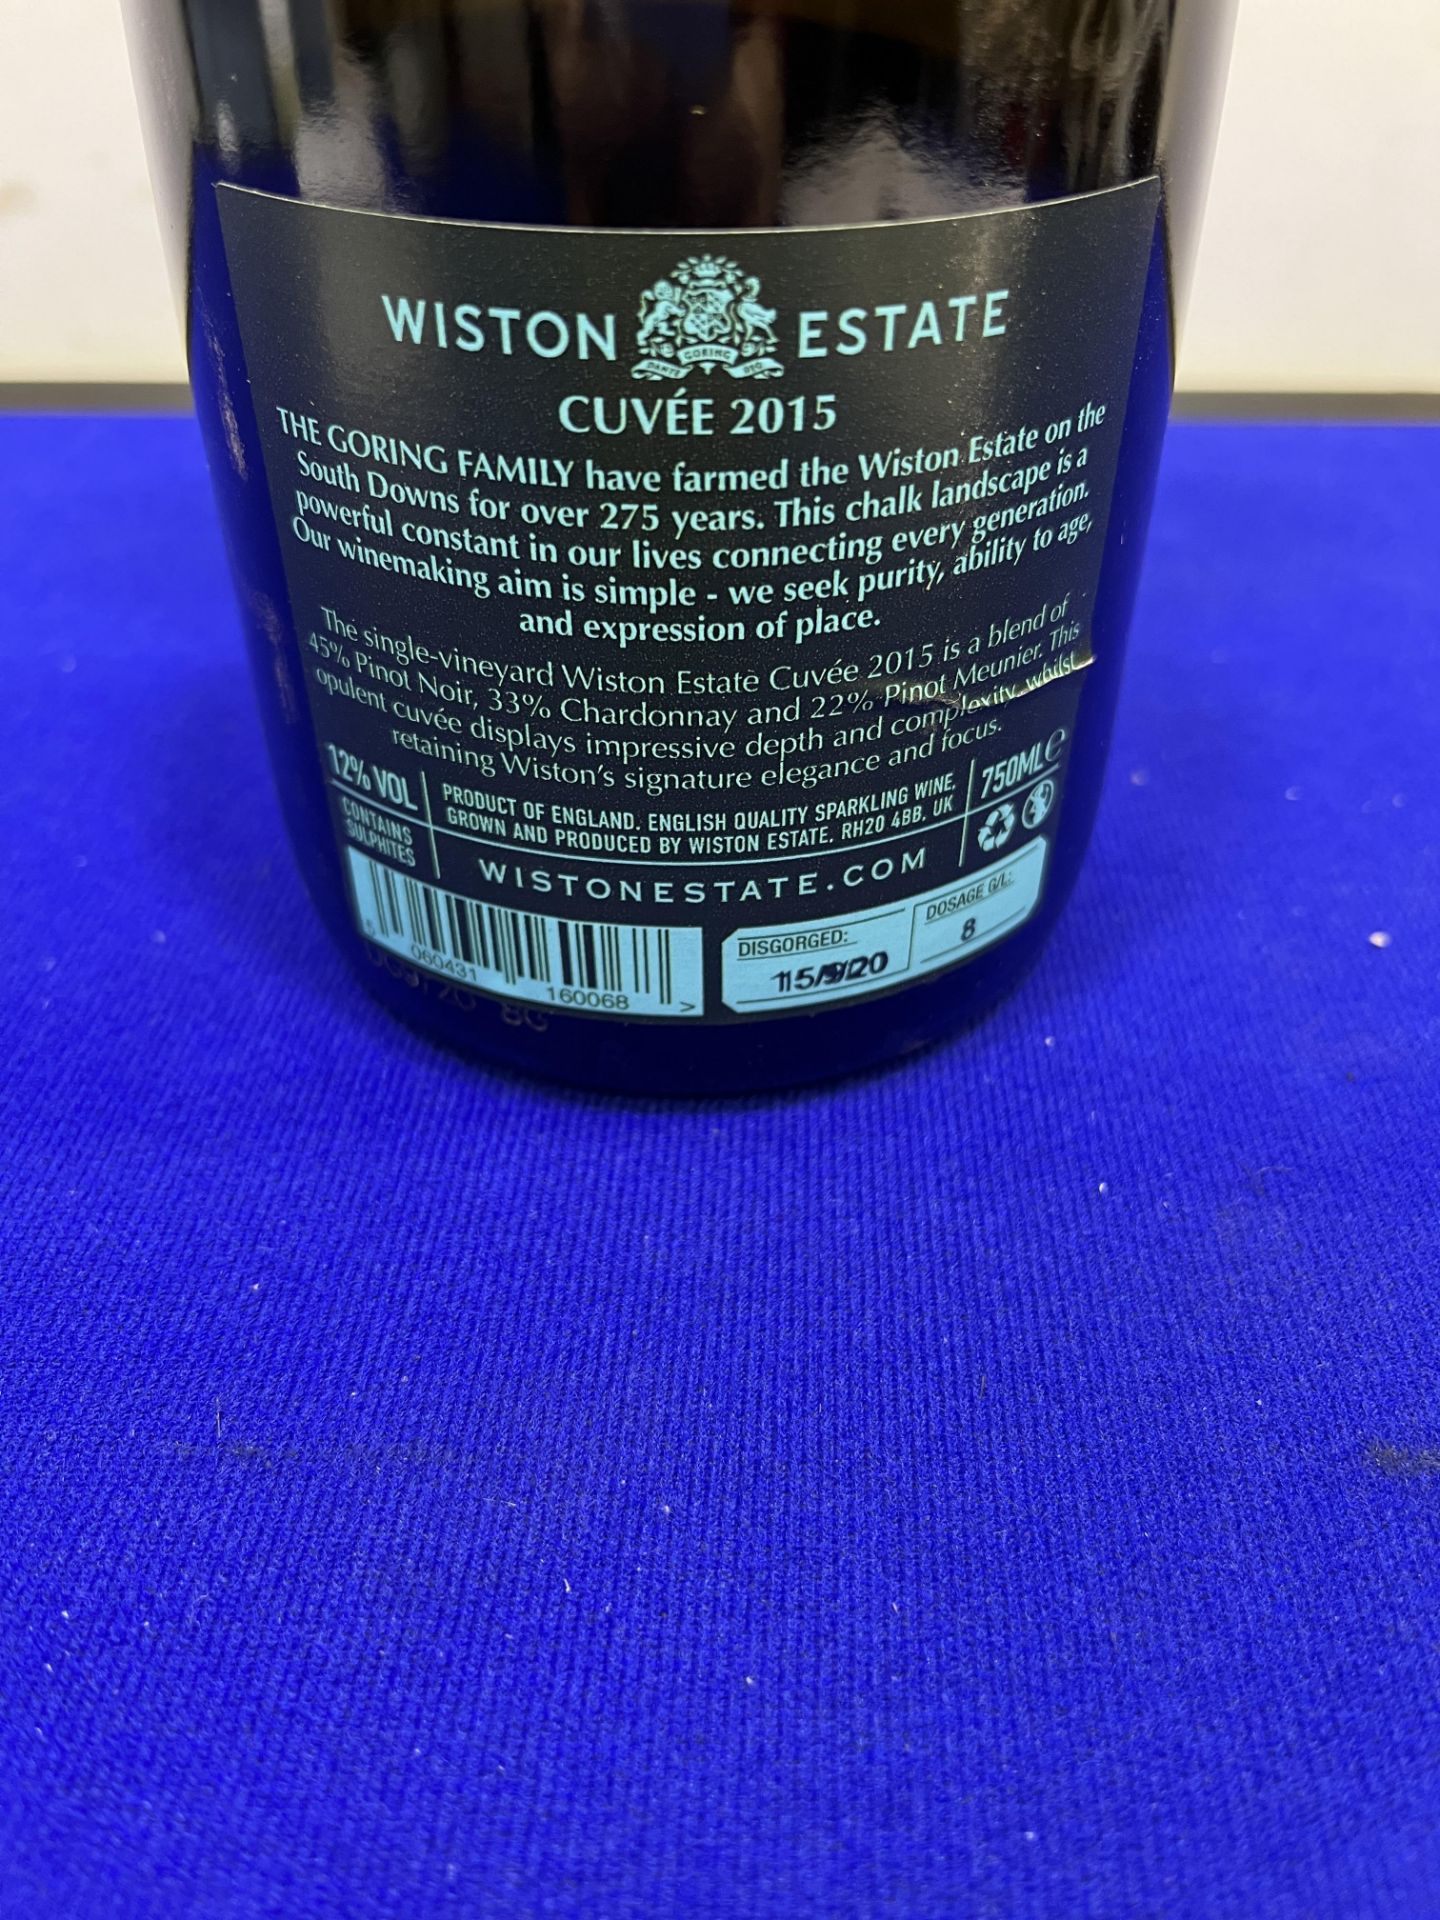 7 x Bottles of Wiston Estate South Downs Cuvee Brut - Image 2 of 2